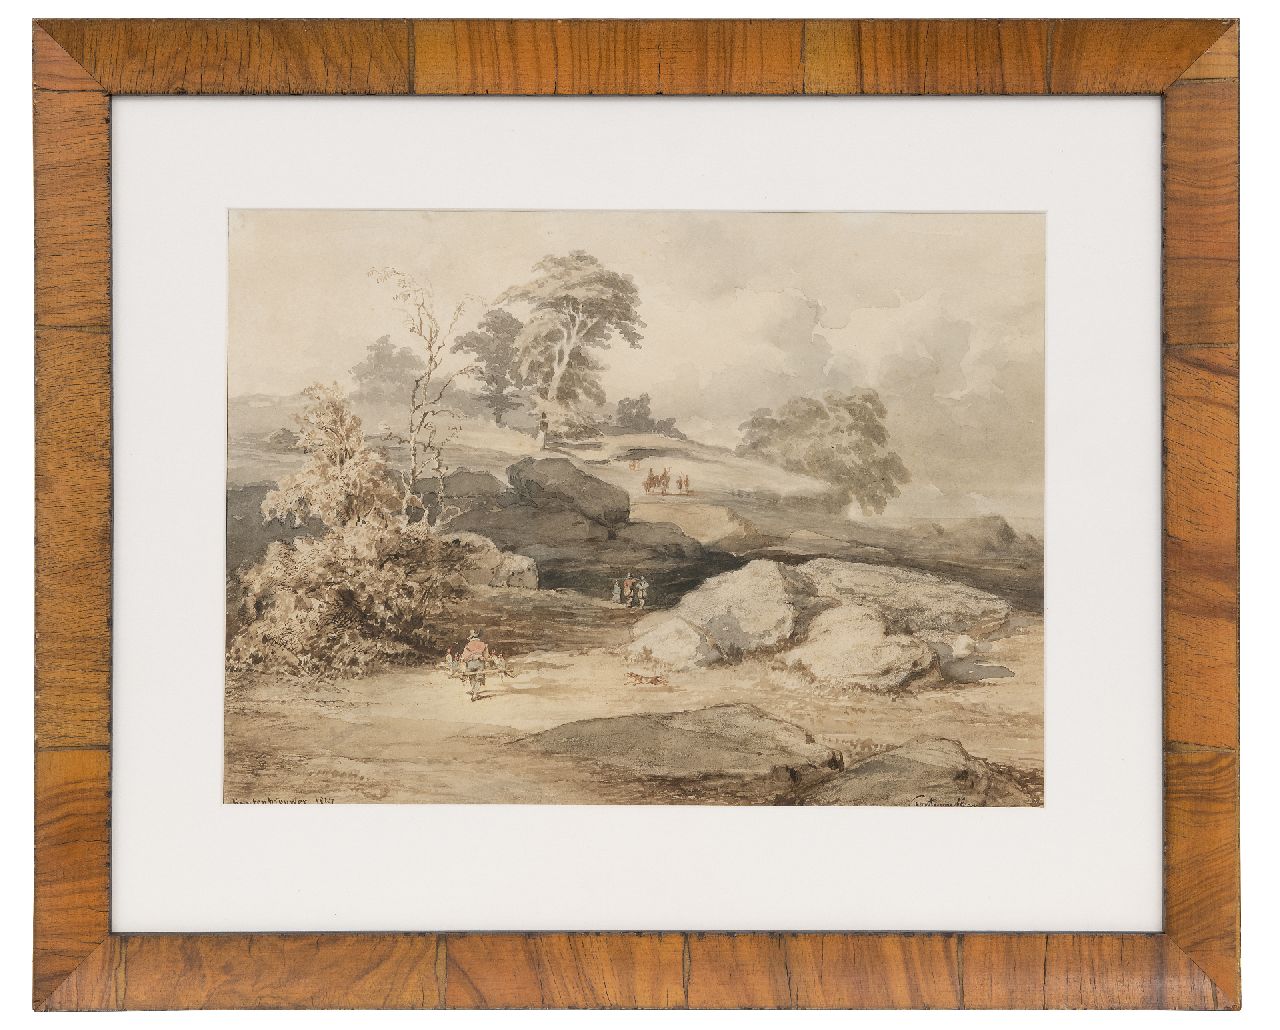 Kuytenbrouwer II M.A.  | Martinus Antonius Kuytenbrouwer II, Falconry near Cuvier Chantillon in the forest of Fontainebleau, brown ink, black chalk and watercolour on paper 24.6 x 34.0 cm, signed l.l. and dated 1847